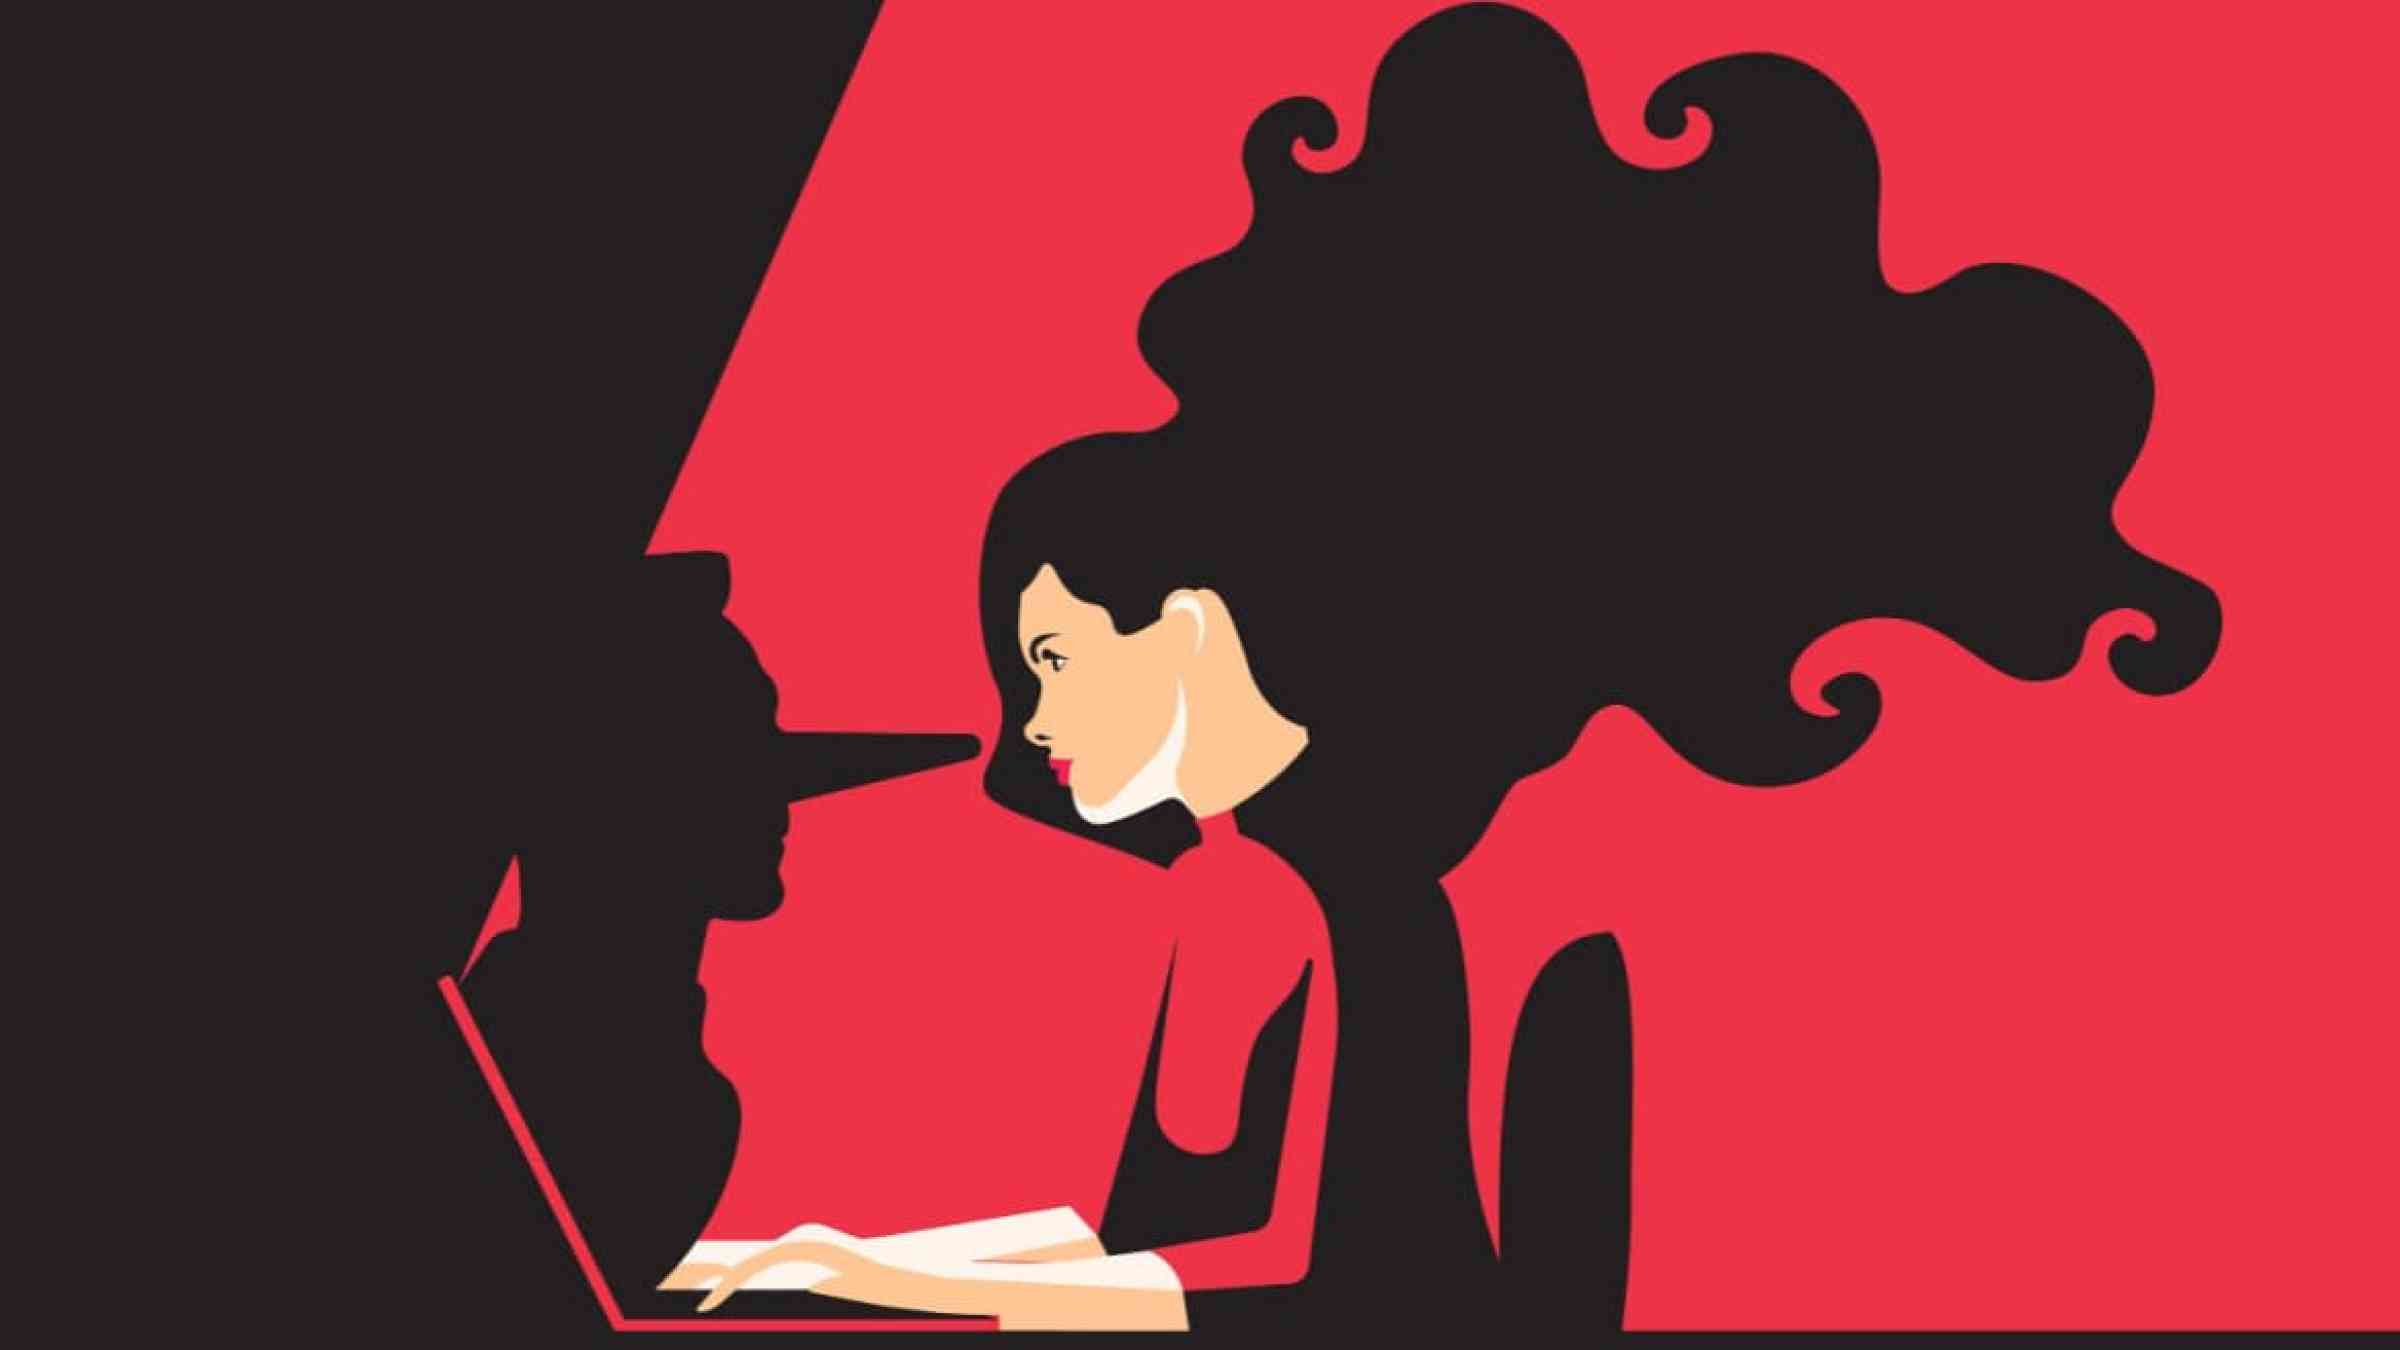 Illustration of a woman typing at a laptop who is shadowed by a man